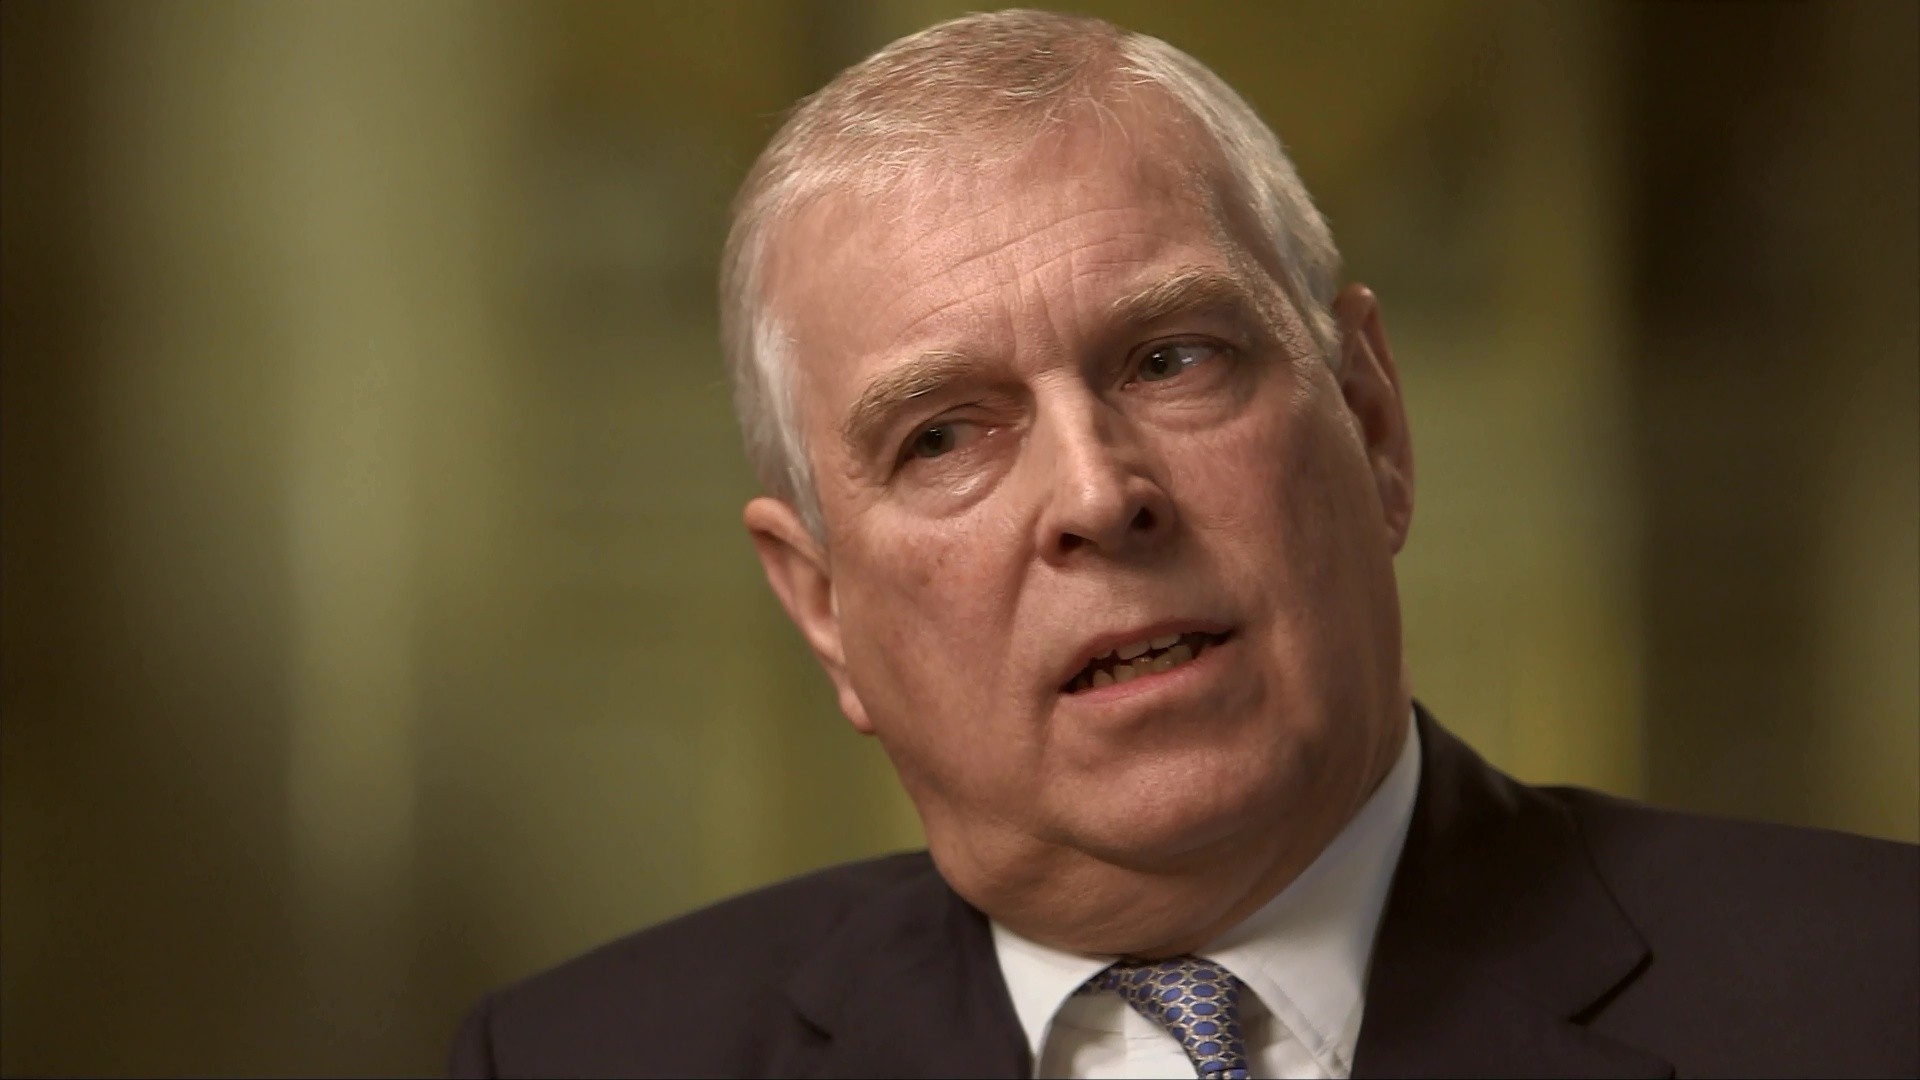 Prince Andrew has denied the claims made against him, saying he had no recollection of Ms Roberts